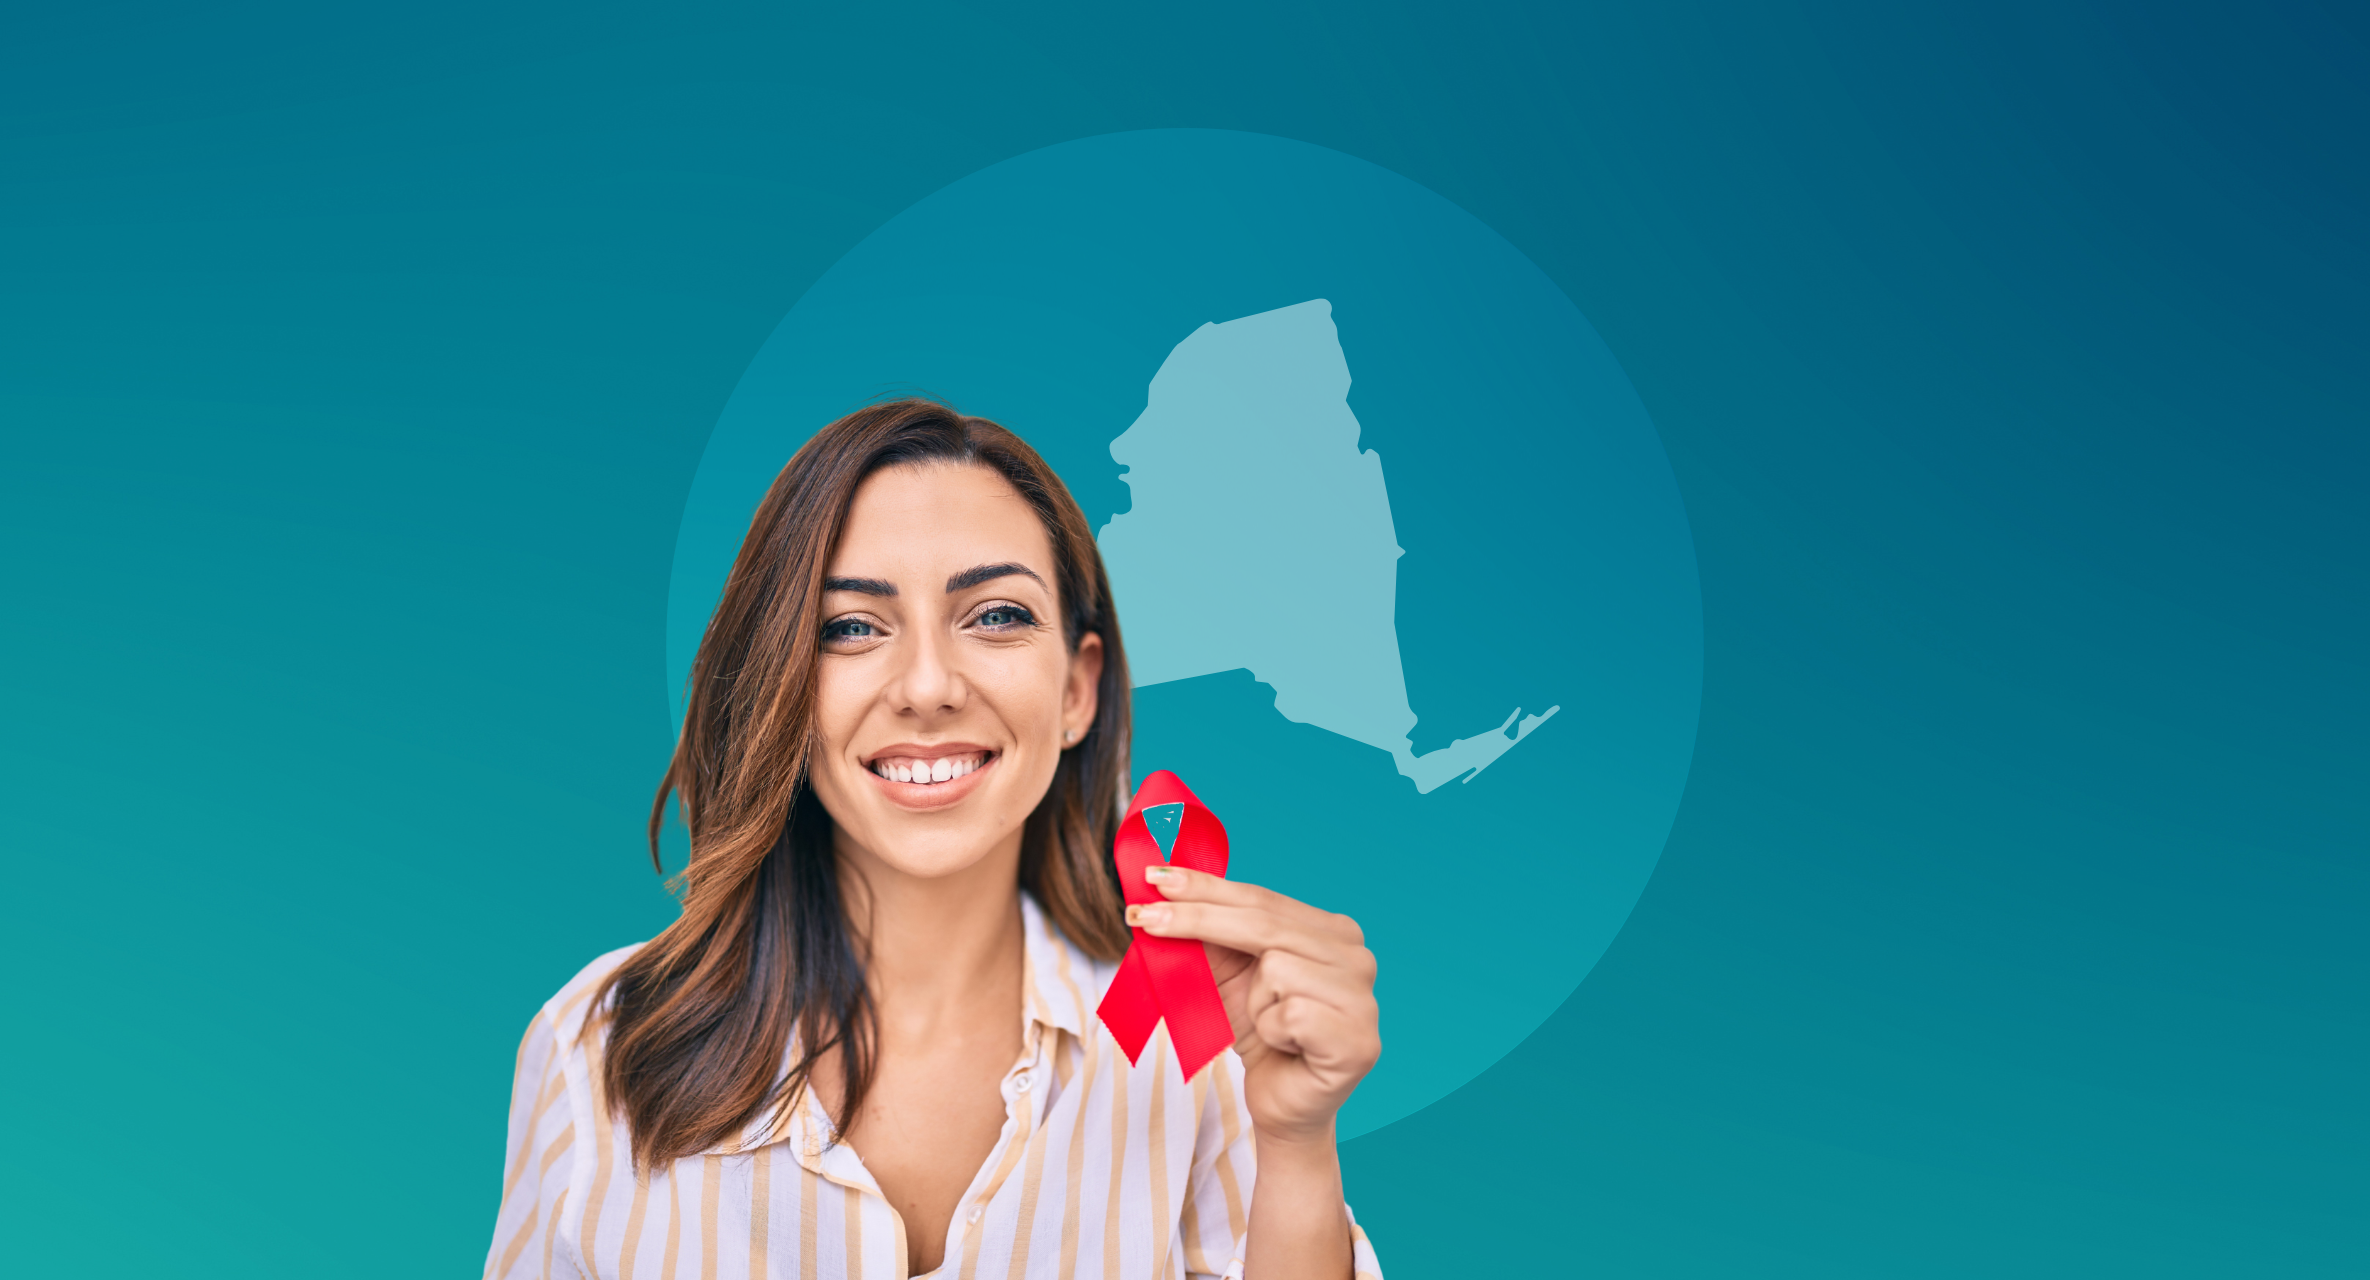 New York State Law on HIV Testing and Confidentiality: Supplement. Our new educational material provides high-quality coverage of Article 27-F, New York's law on HIV testing and confidentiality